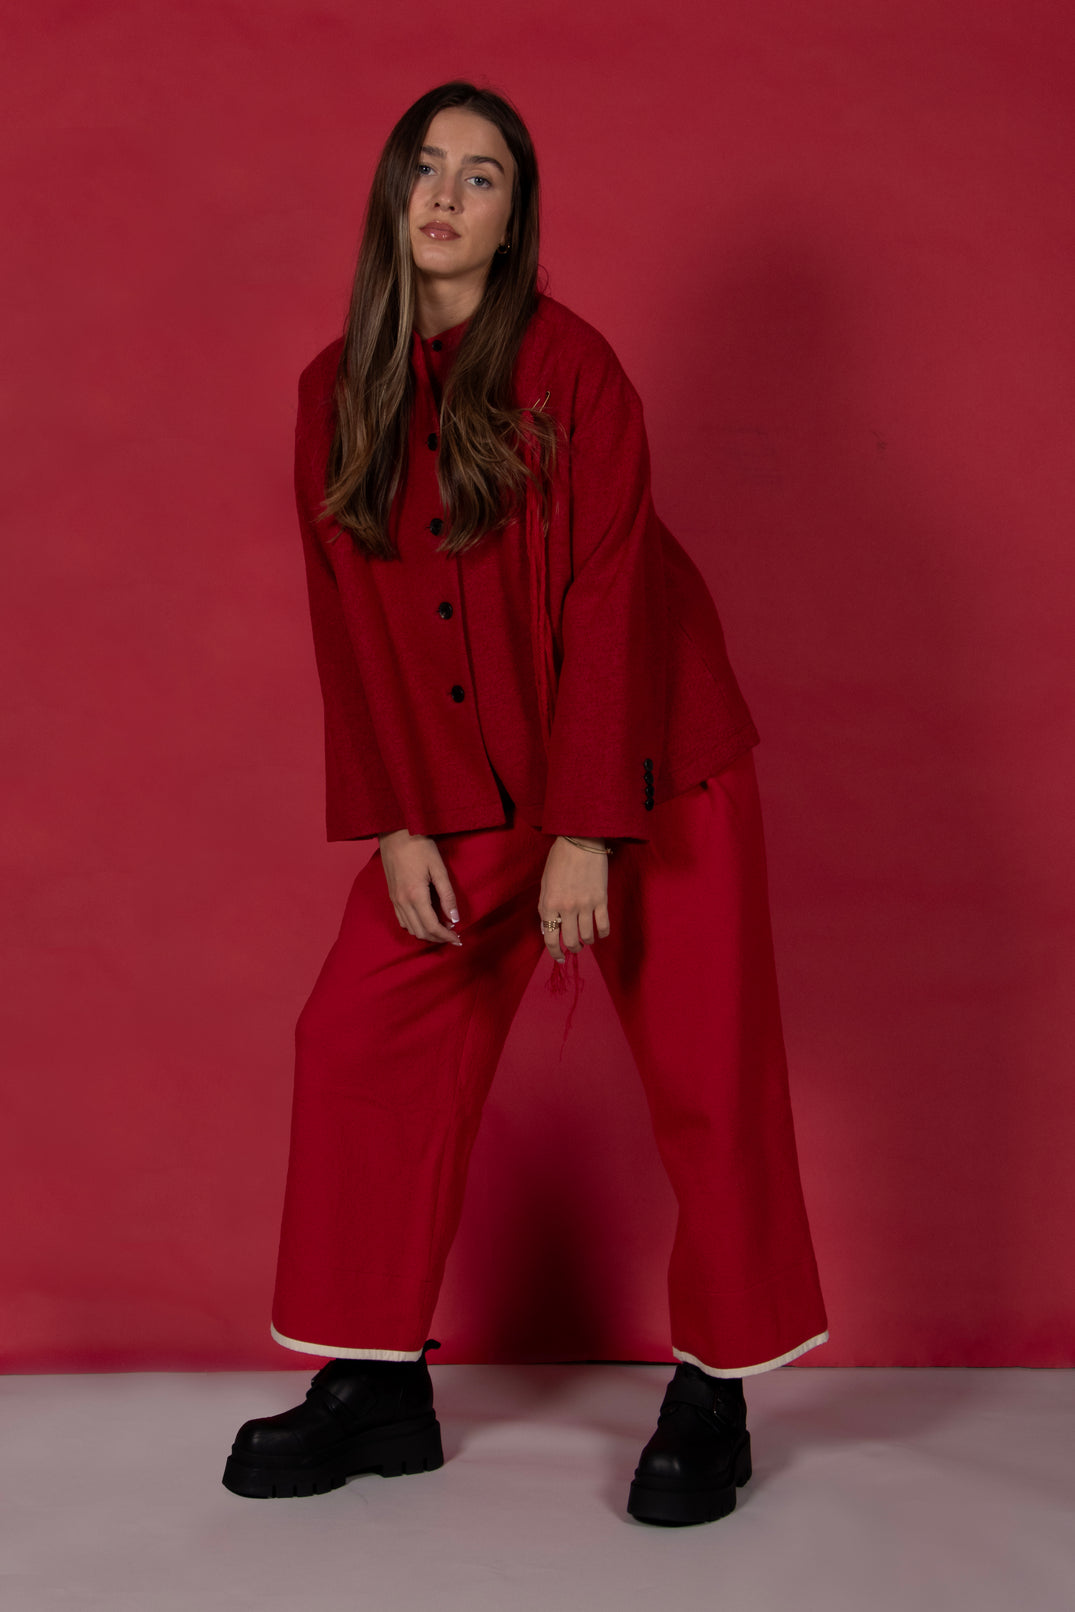 Pleated Trousers with Contrast Lining in Red Anthracite